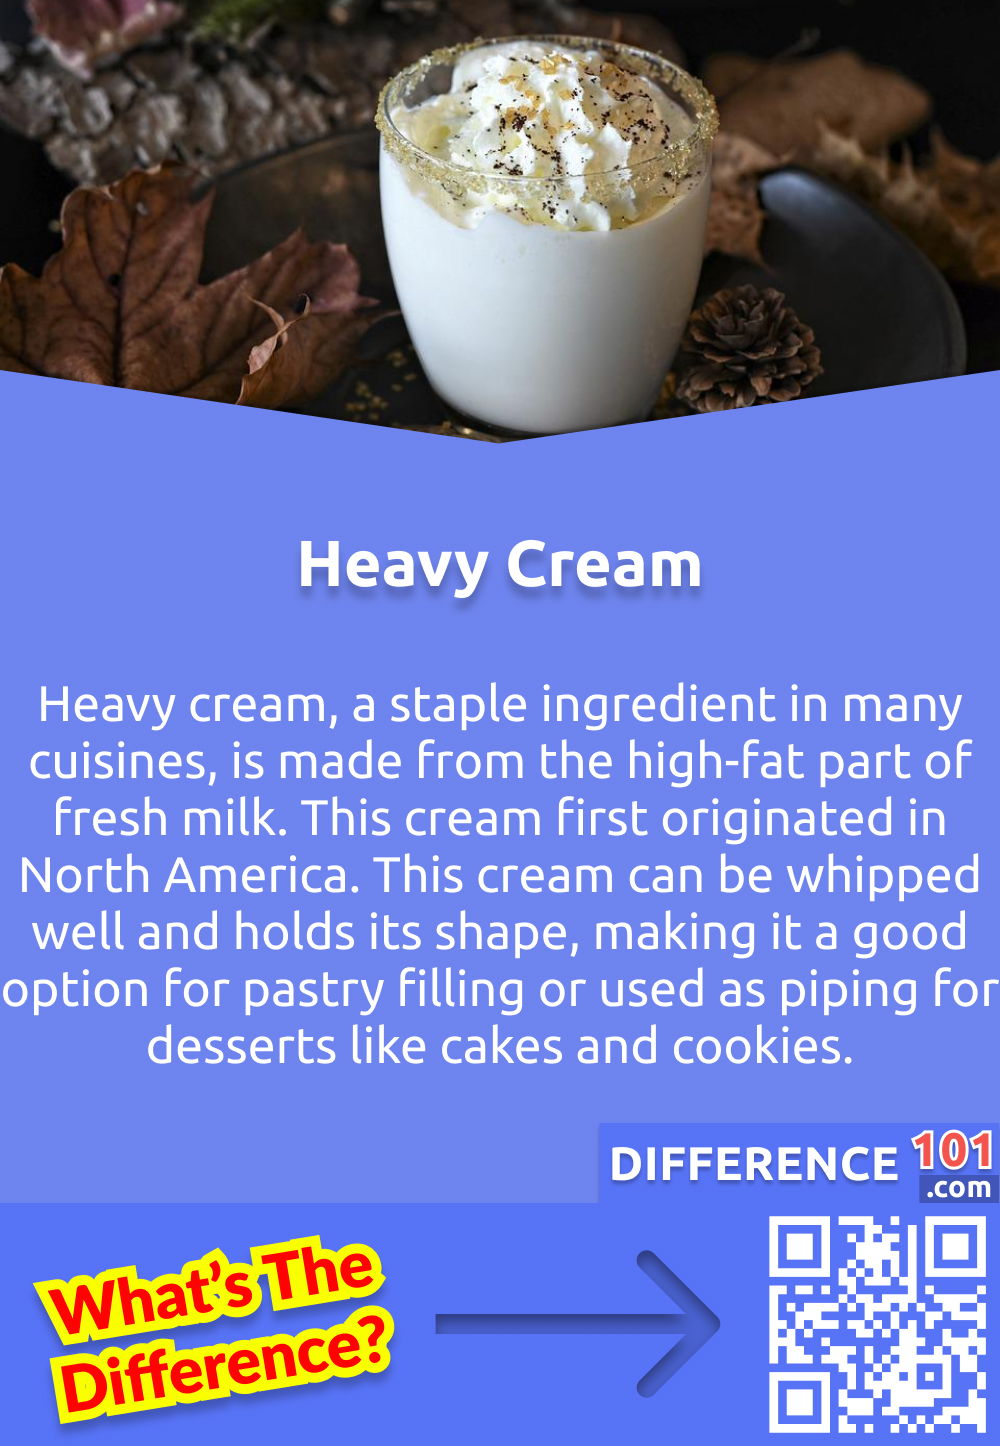 What is Heavy Cream? Heavy cream, a staple ingredient in many cuisines, is made from the high-fat part of fresh milk. This cream first originated in North America. This cream can be whipped well and holds its shape, making it a good option for pastry filling or used as piping for desserts like cakes and cookies. 